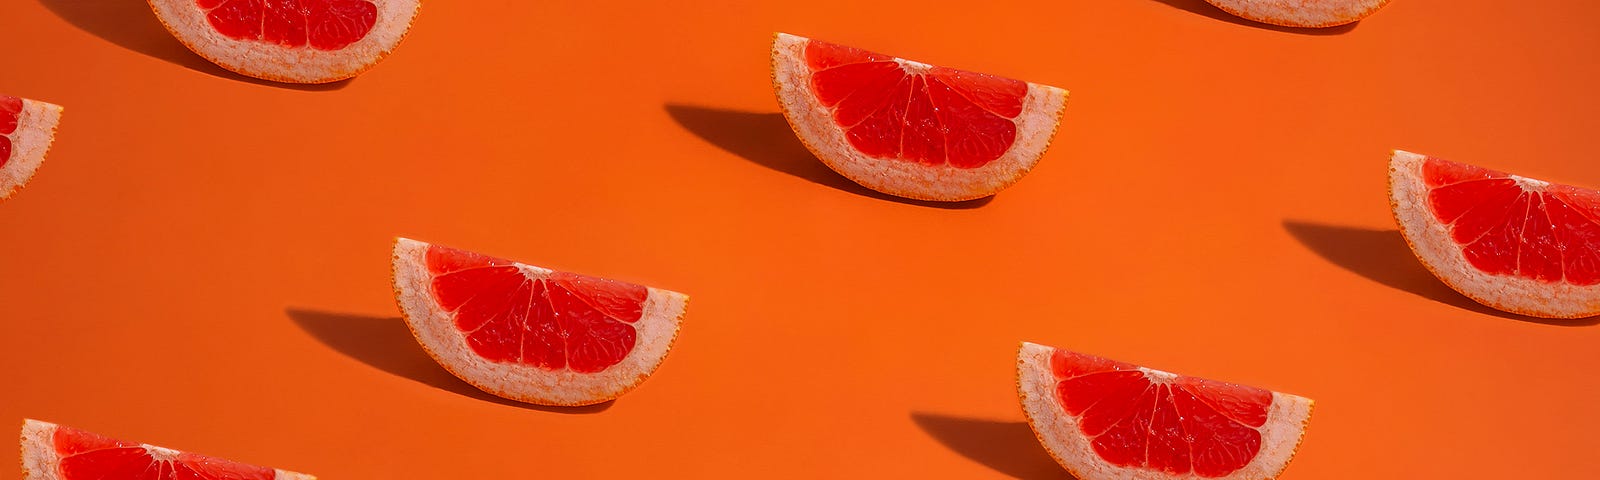 Slides of blood orange are repeated in a diagonal pattern against an orange background.